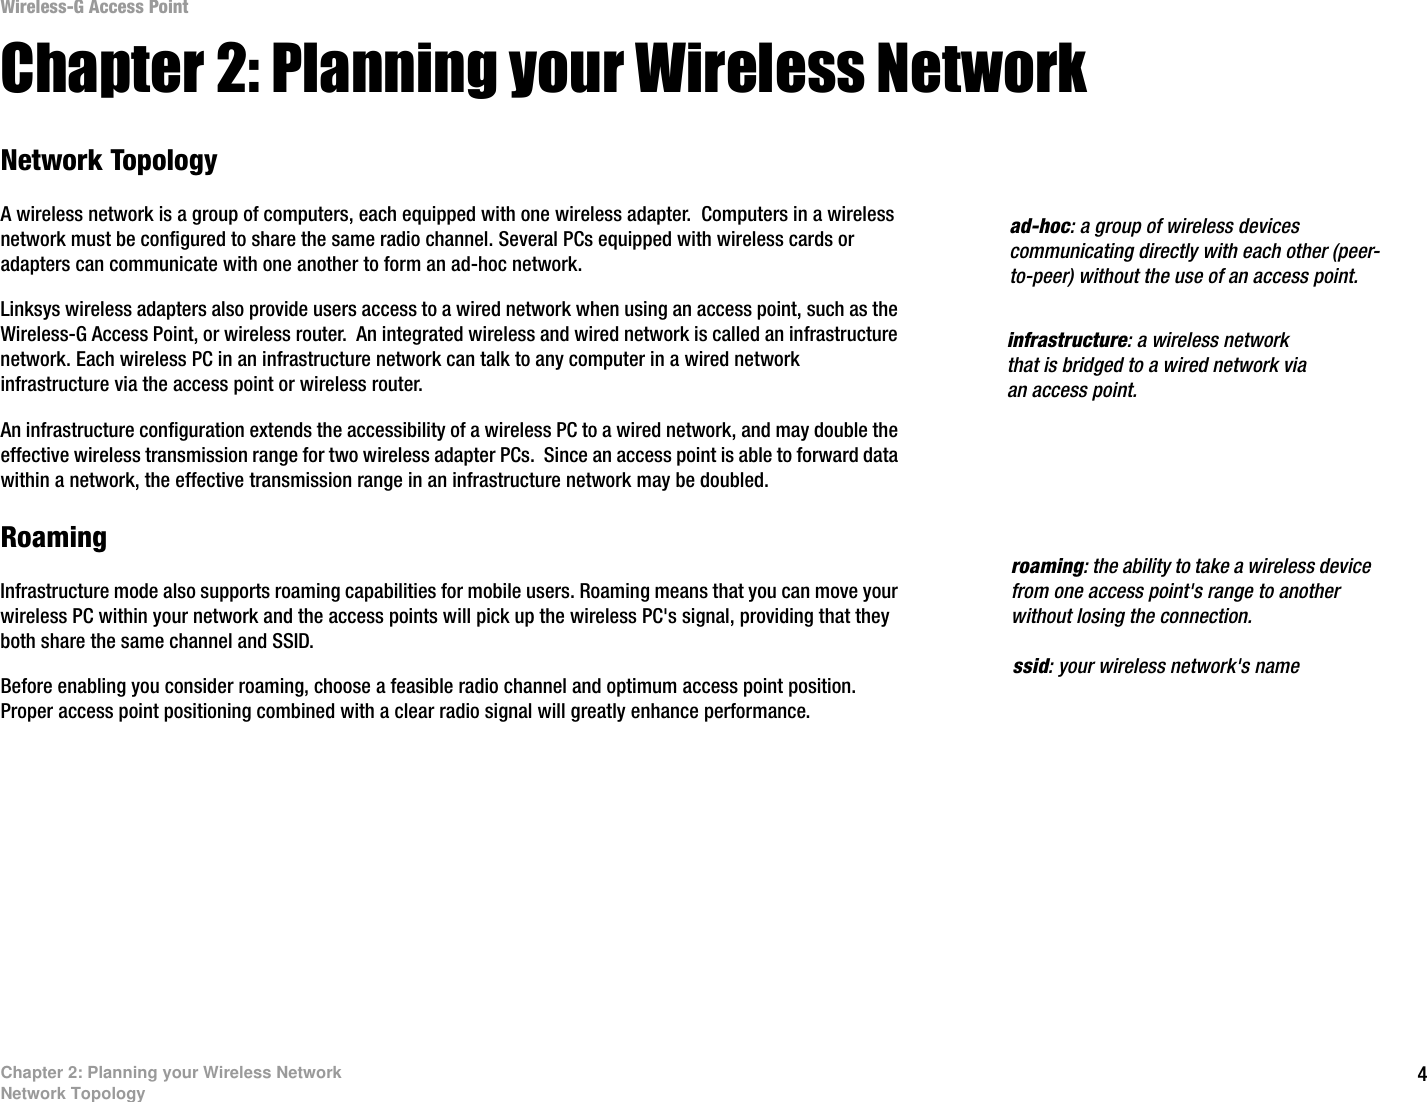 Wireless-G Access Point Chapter 2: Planning your Wireless Network Network Topology A wireless network is a group of computers, each equipped with one wireless adapter.  Computers in a wireless  ad-hoc: a group of wireless devices network must be configured to share the same radio channel. Several PCs equipped with wireless cards or  communicating directly with each other (peer-adapters can communicate with one another to form an ad-hoc network.  to-peer) without the use of an access point. Linksys wireless adapters also provide users access to a wired network when using an access point, such as the Wireless-G Access Point, or wireless router.  An integrated wireless and wired network is called an infrastructure  infrastructure: a wireless network network. Each wireless PC in an infrastructure network can talk to any computer in a wired network  that is bridged to a wired network via infrastructure via the access point or wireless router.  an access point. An infrastructure configuration extends the accessibility of a wireless PC to a wired network, and may double the effective wireless transmission range for two wireless adapter PCs.  Since an access point is able to forward data within a network, the effective transmission range in an infrastructure network may be doubled. Roaming roaming: the ability to take a wireless device Infrastructure mode also supports roaming capabilities for mobile users. Roaming means that you can move your  from one access point&apos;s range to another wireless PC within your network and the access points will pick up the wireless PC&apos;s signal, providing that they  without losing the connection. both share the same channel and SSID. ssid: your wireless network&apos;s name Before enabling you consider roaming, choose a feasible radio channel and optimum access point position. Proper access point positioning combined with a clear radio signal will greatly enhance performance. Chapter 2: Planning your Wireless Network Network Topology  4 